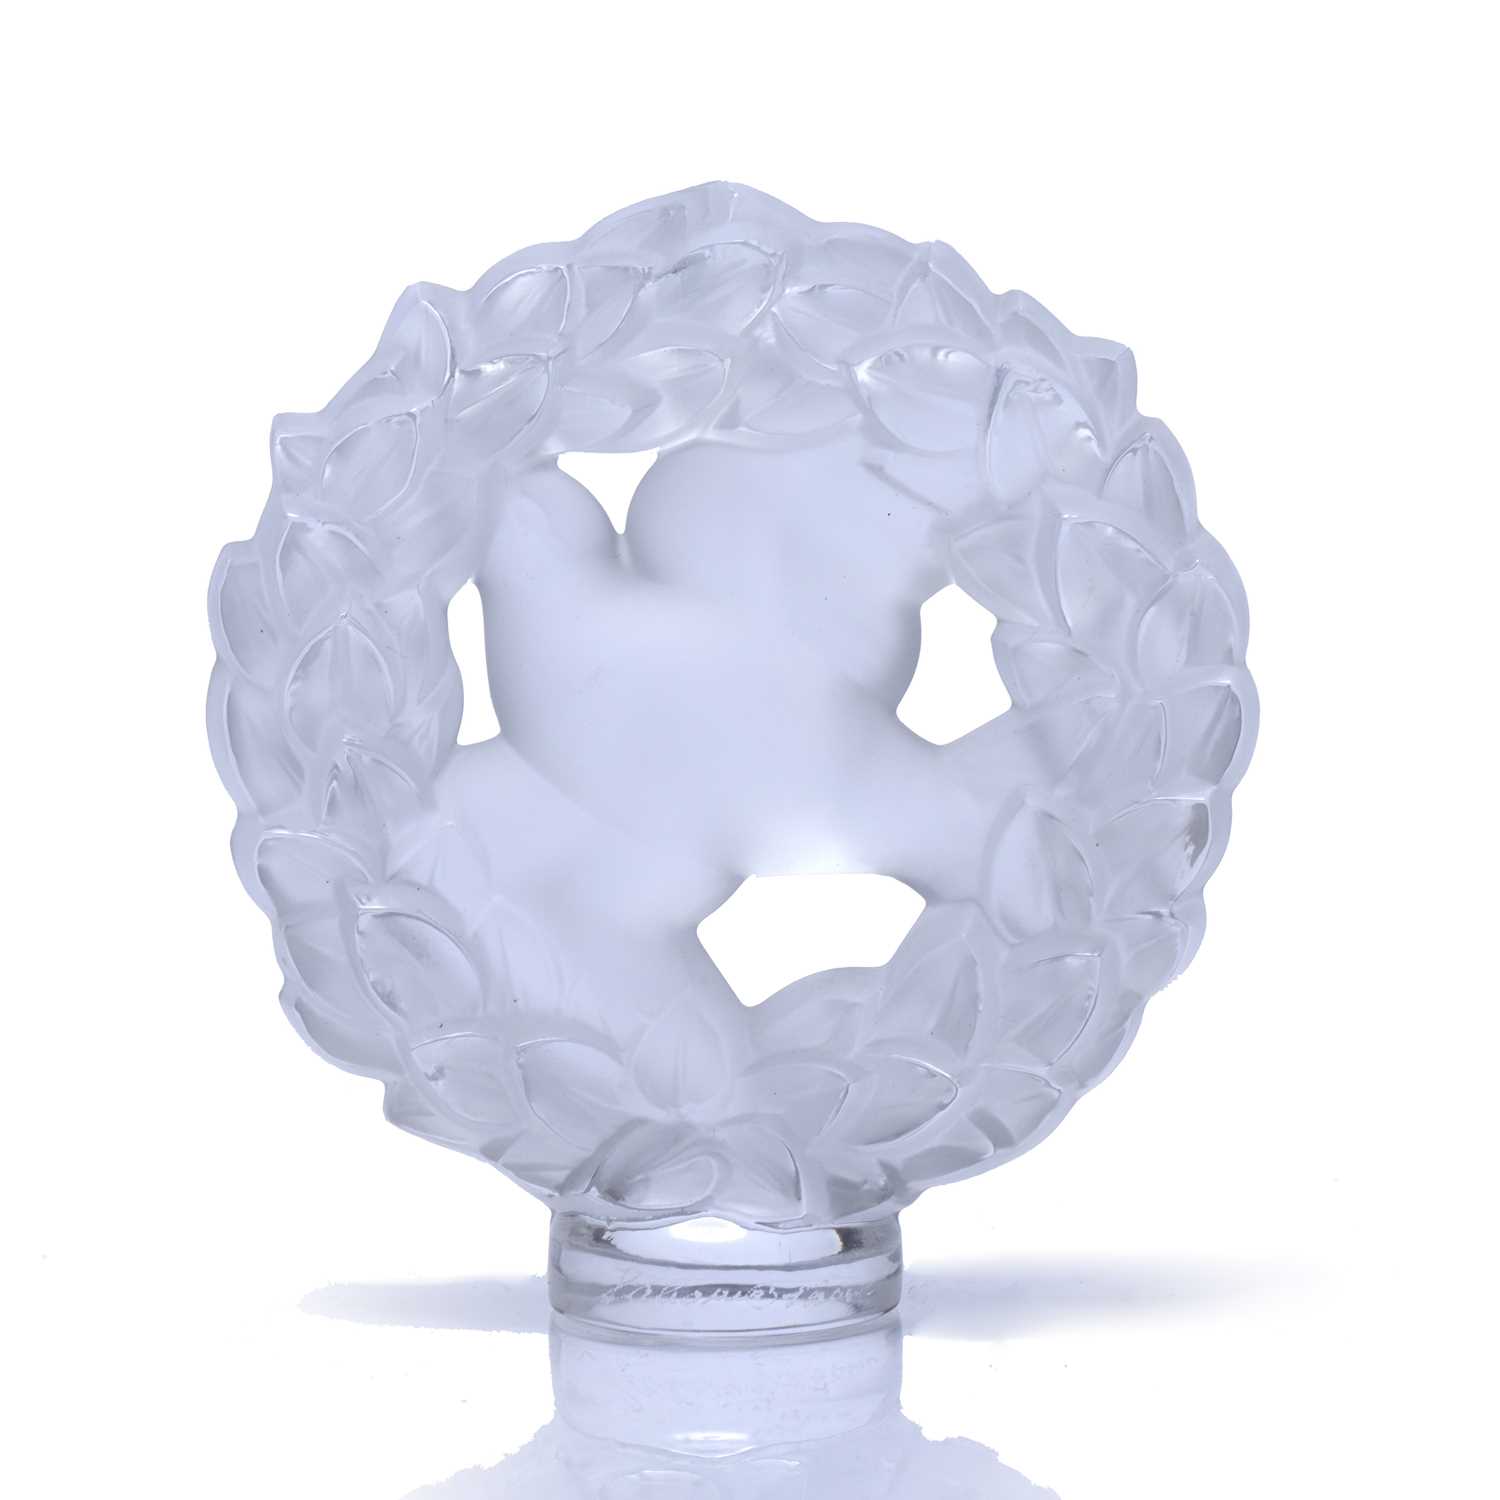 René Lalique (1860-1945) 'Pax dove in wreath' glass paperweight, signed 'Lalique France' to the - Image 2 of 3